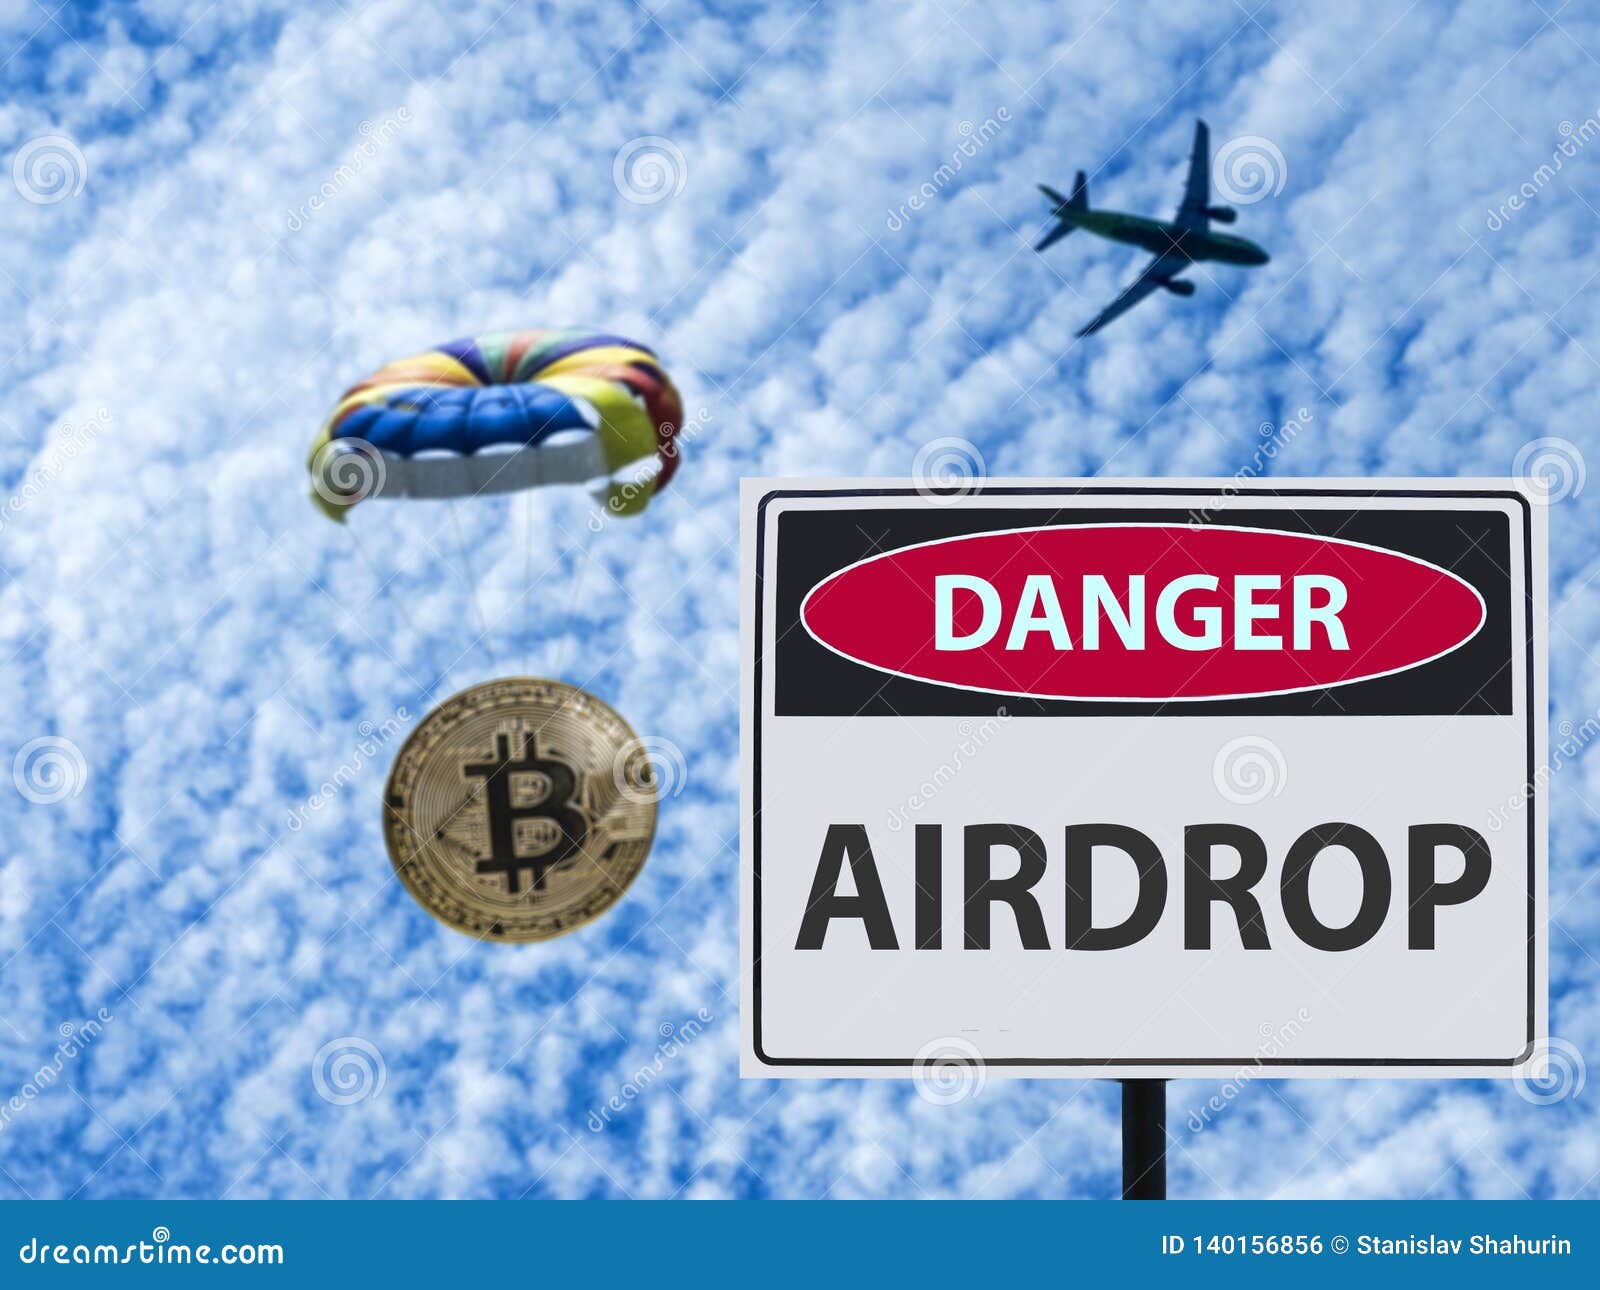 Sign Danger Airdrop and Parachute from the Plane Token. Stock Photo